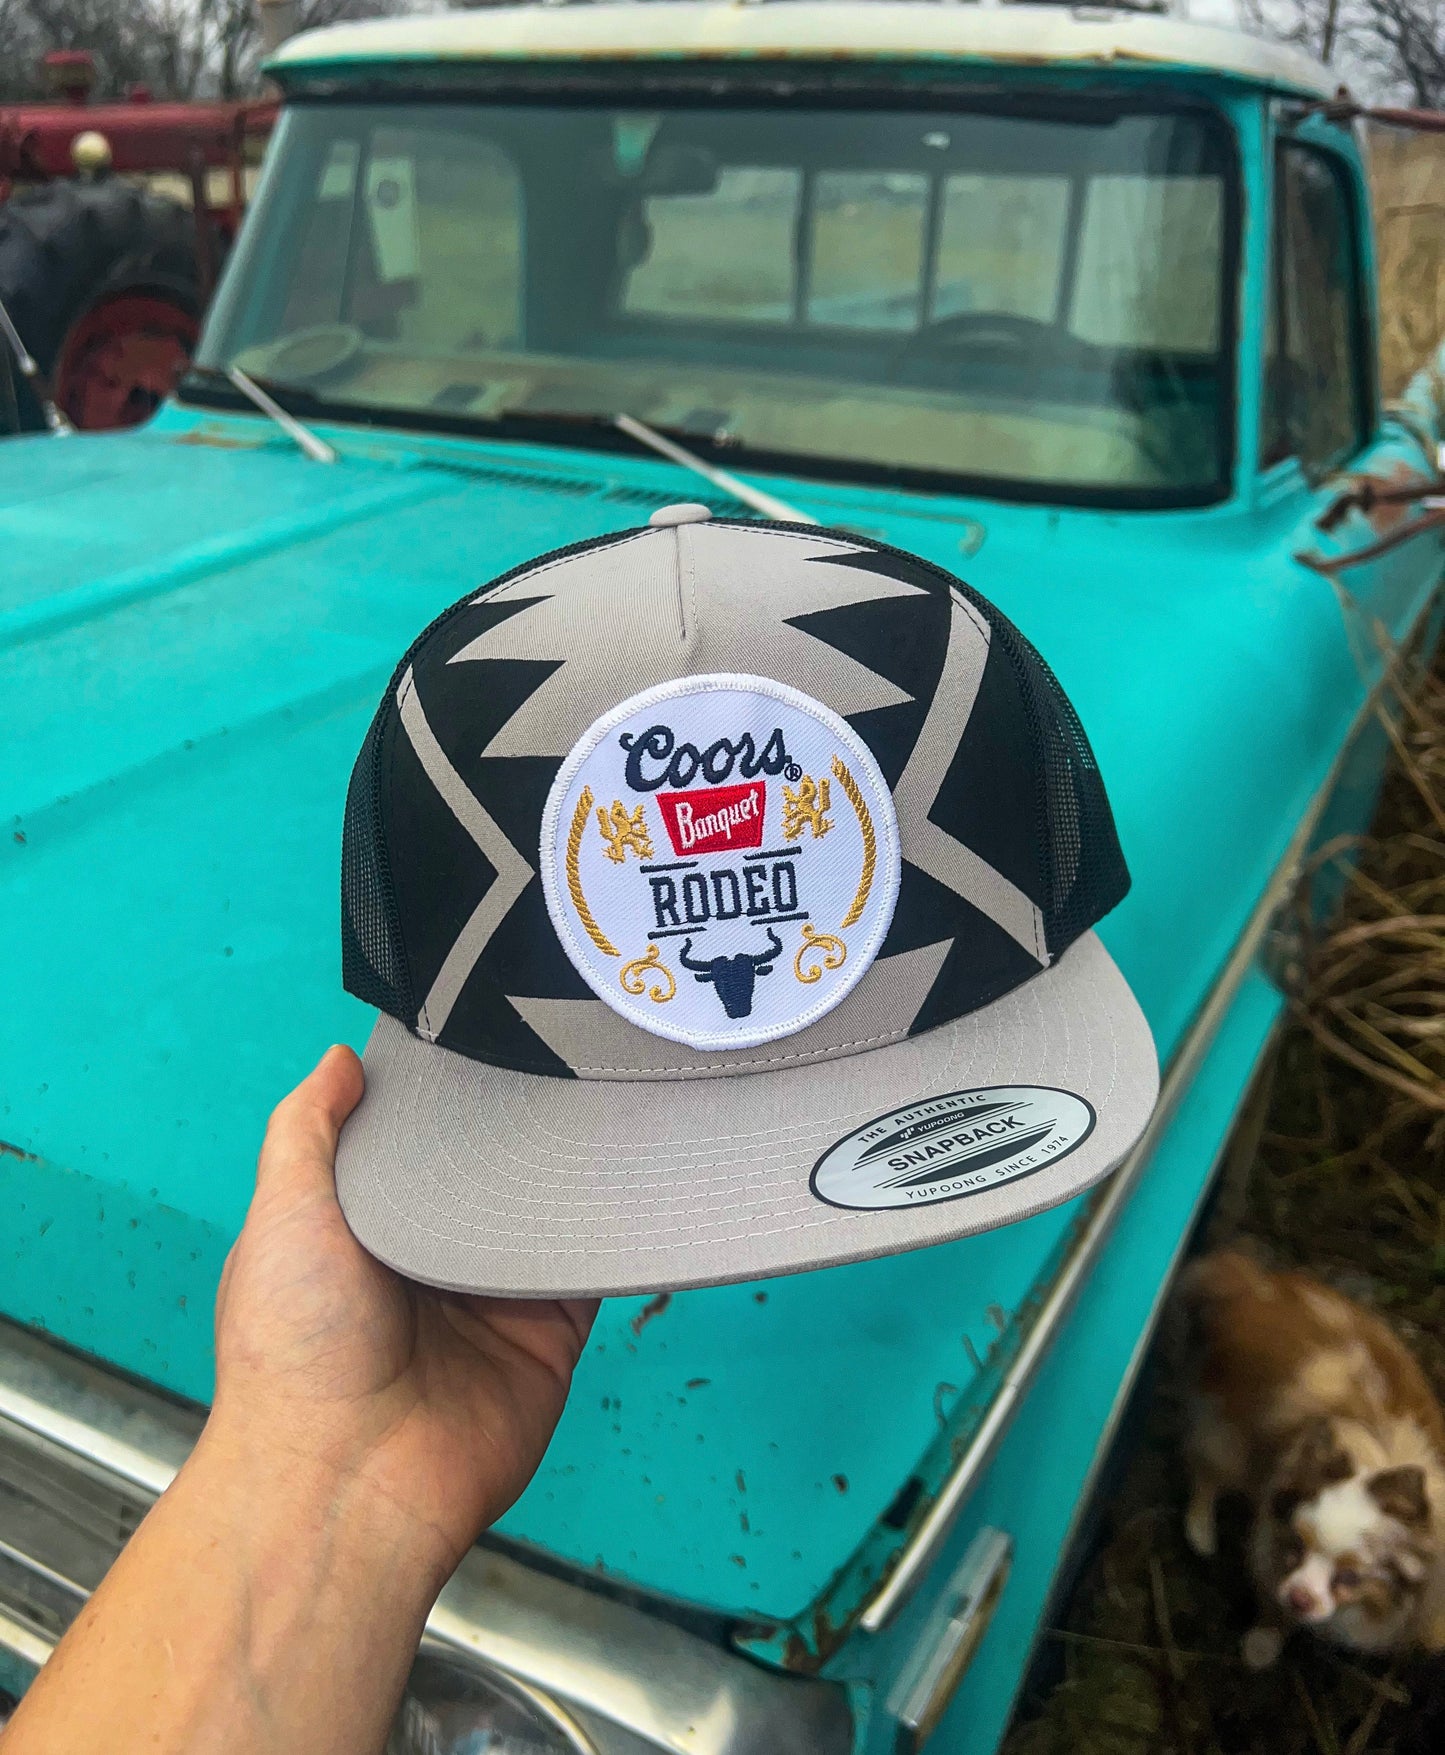 Patchy Co Hat- Coors Rodeo